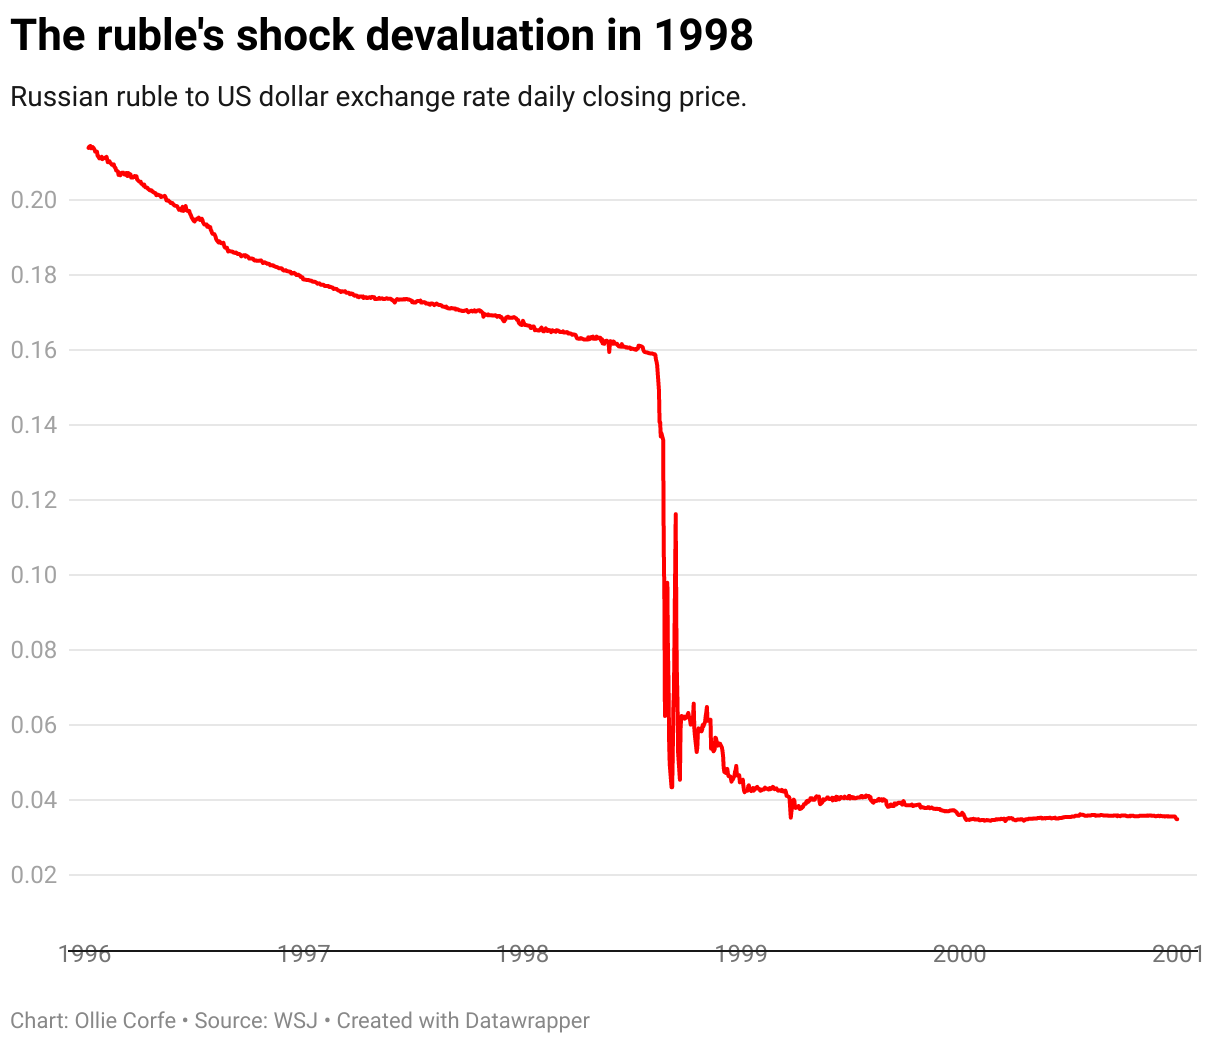 Russian ruble exchange rate.